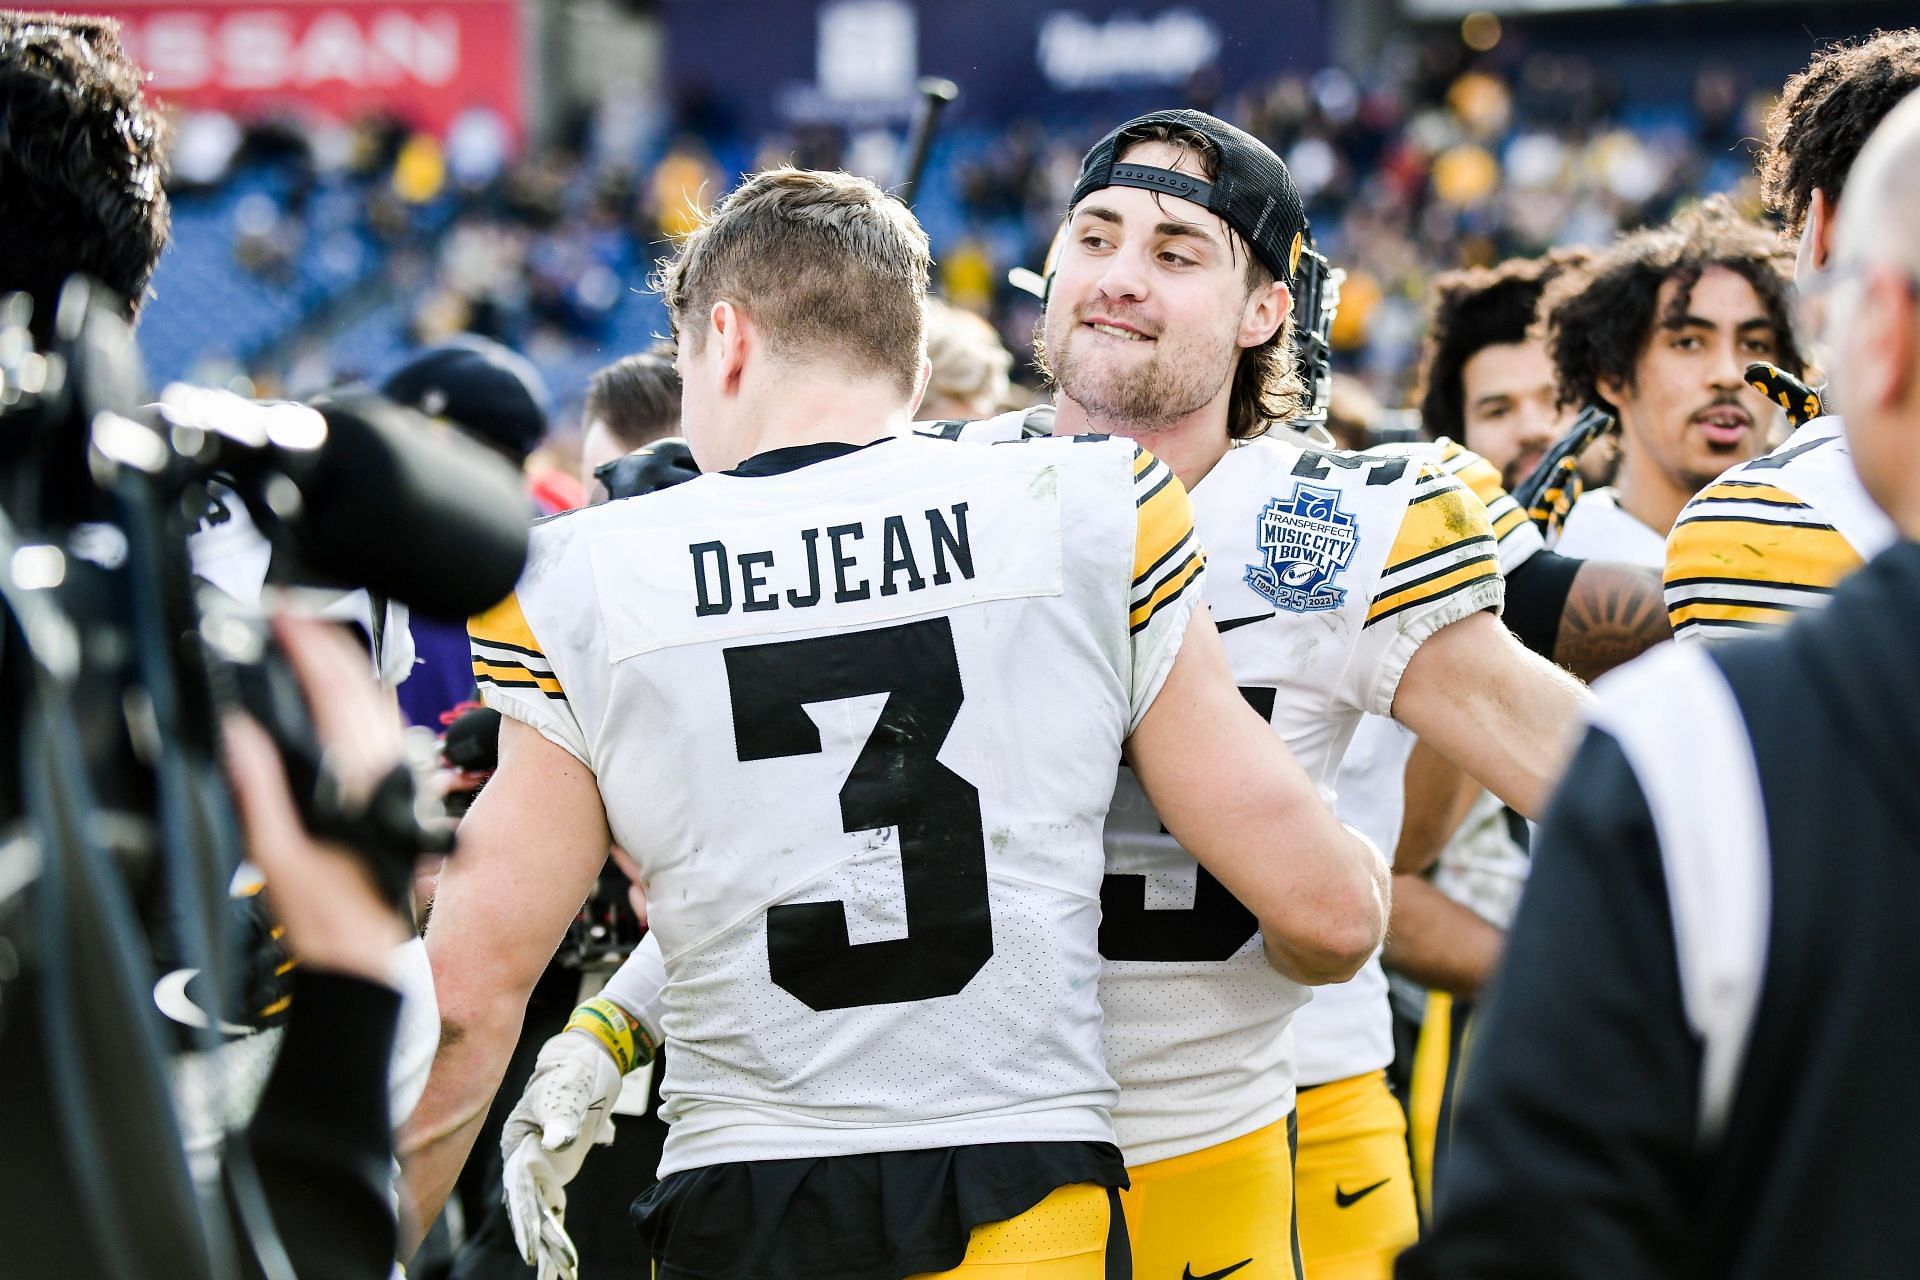 Cooper DeJean #3 and Riley Moss #33 of the Iowa Hawkeyes celebrate their win against the Kentucky Wildcats